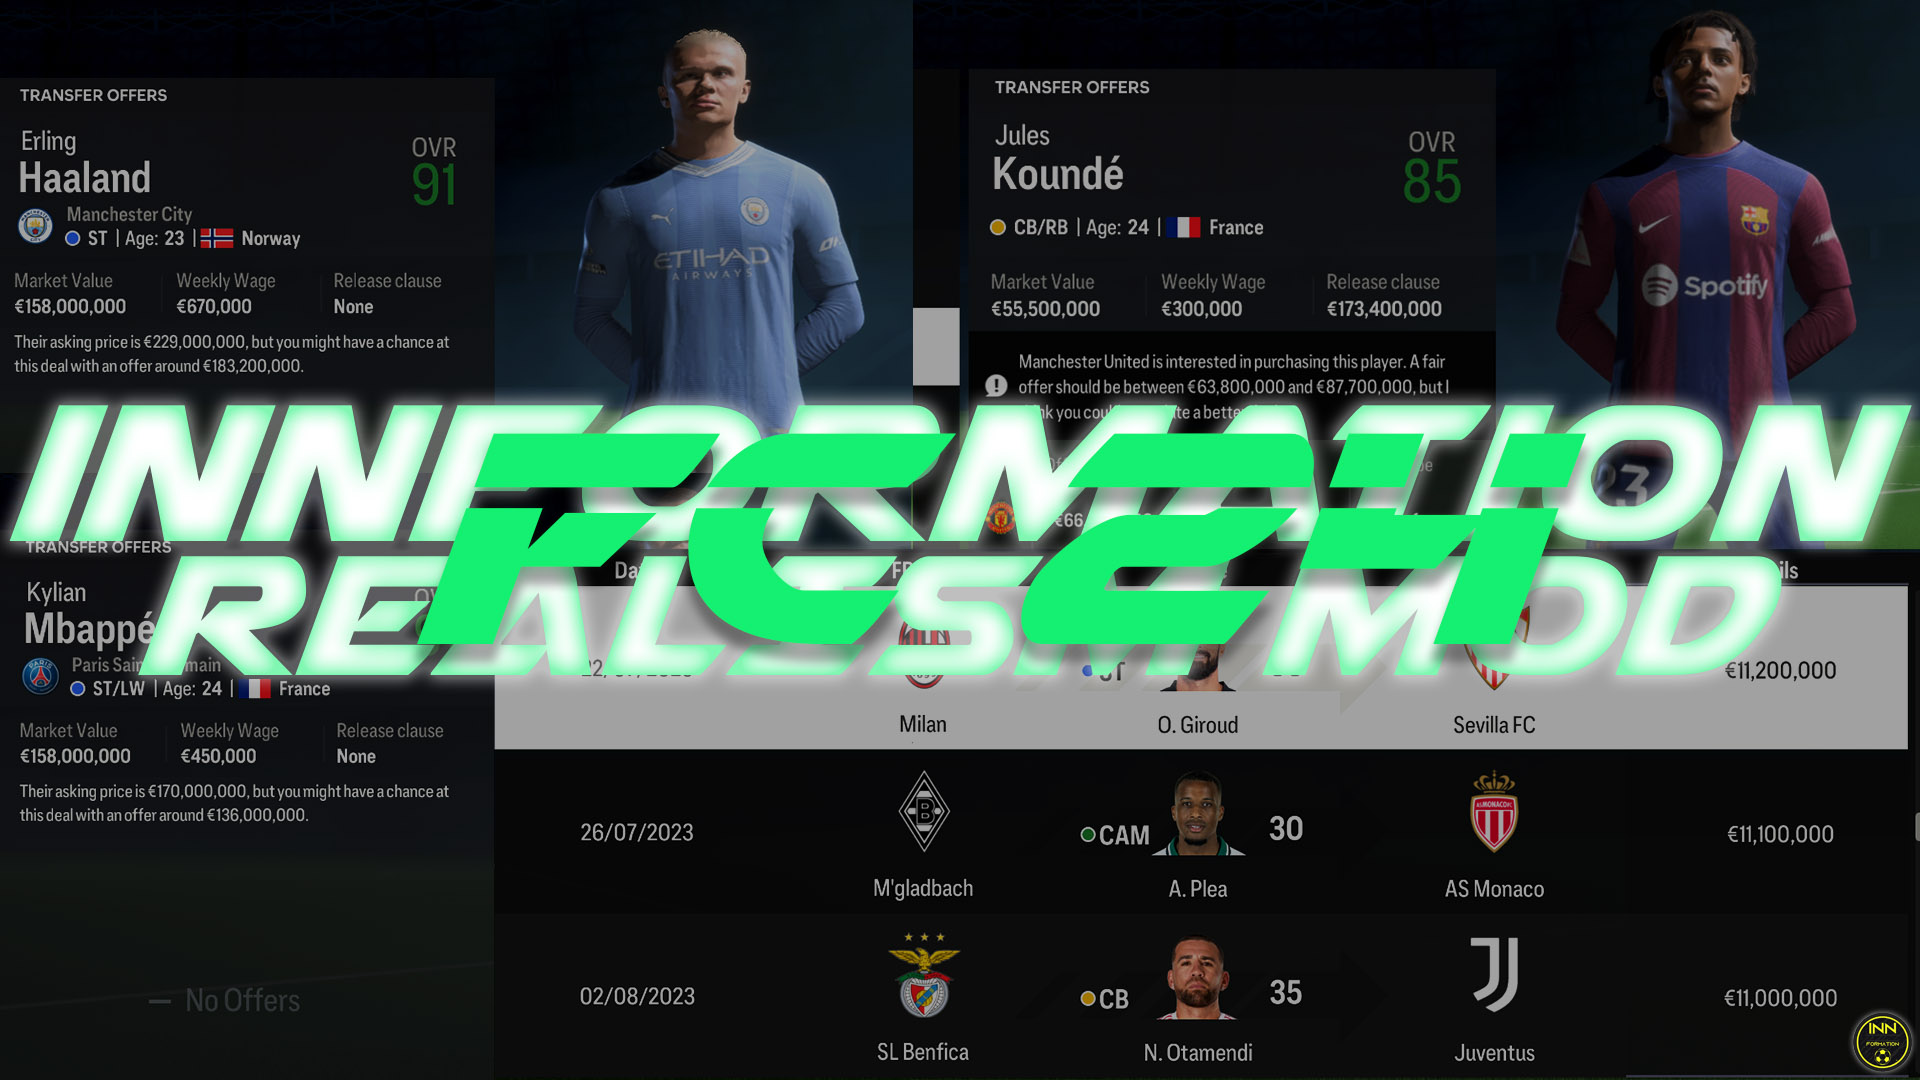 I Downloaded *NEW* FC 24 MODS and it FIXED Career Mode! 